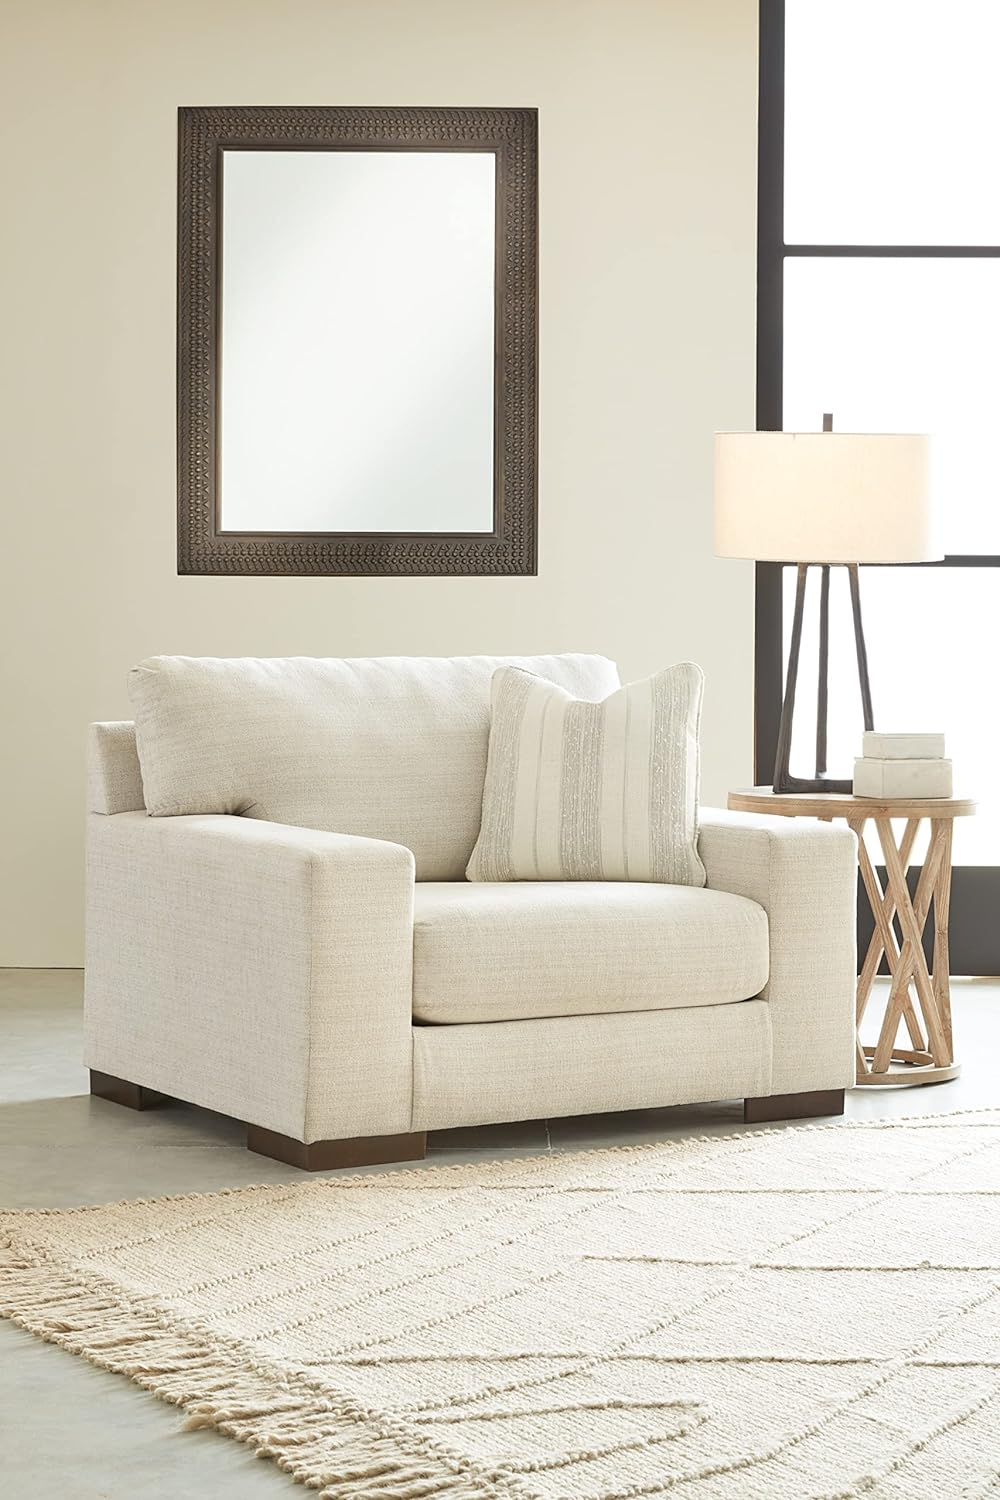 Like NEW - Signature Design by Ashley Maggie Contemporary Upholstered Chair and a Half, Beige - Retail $596